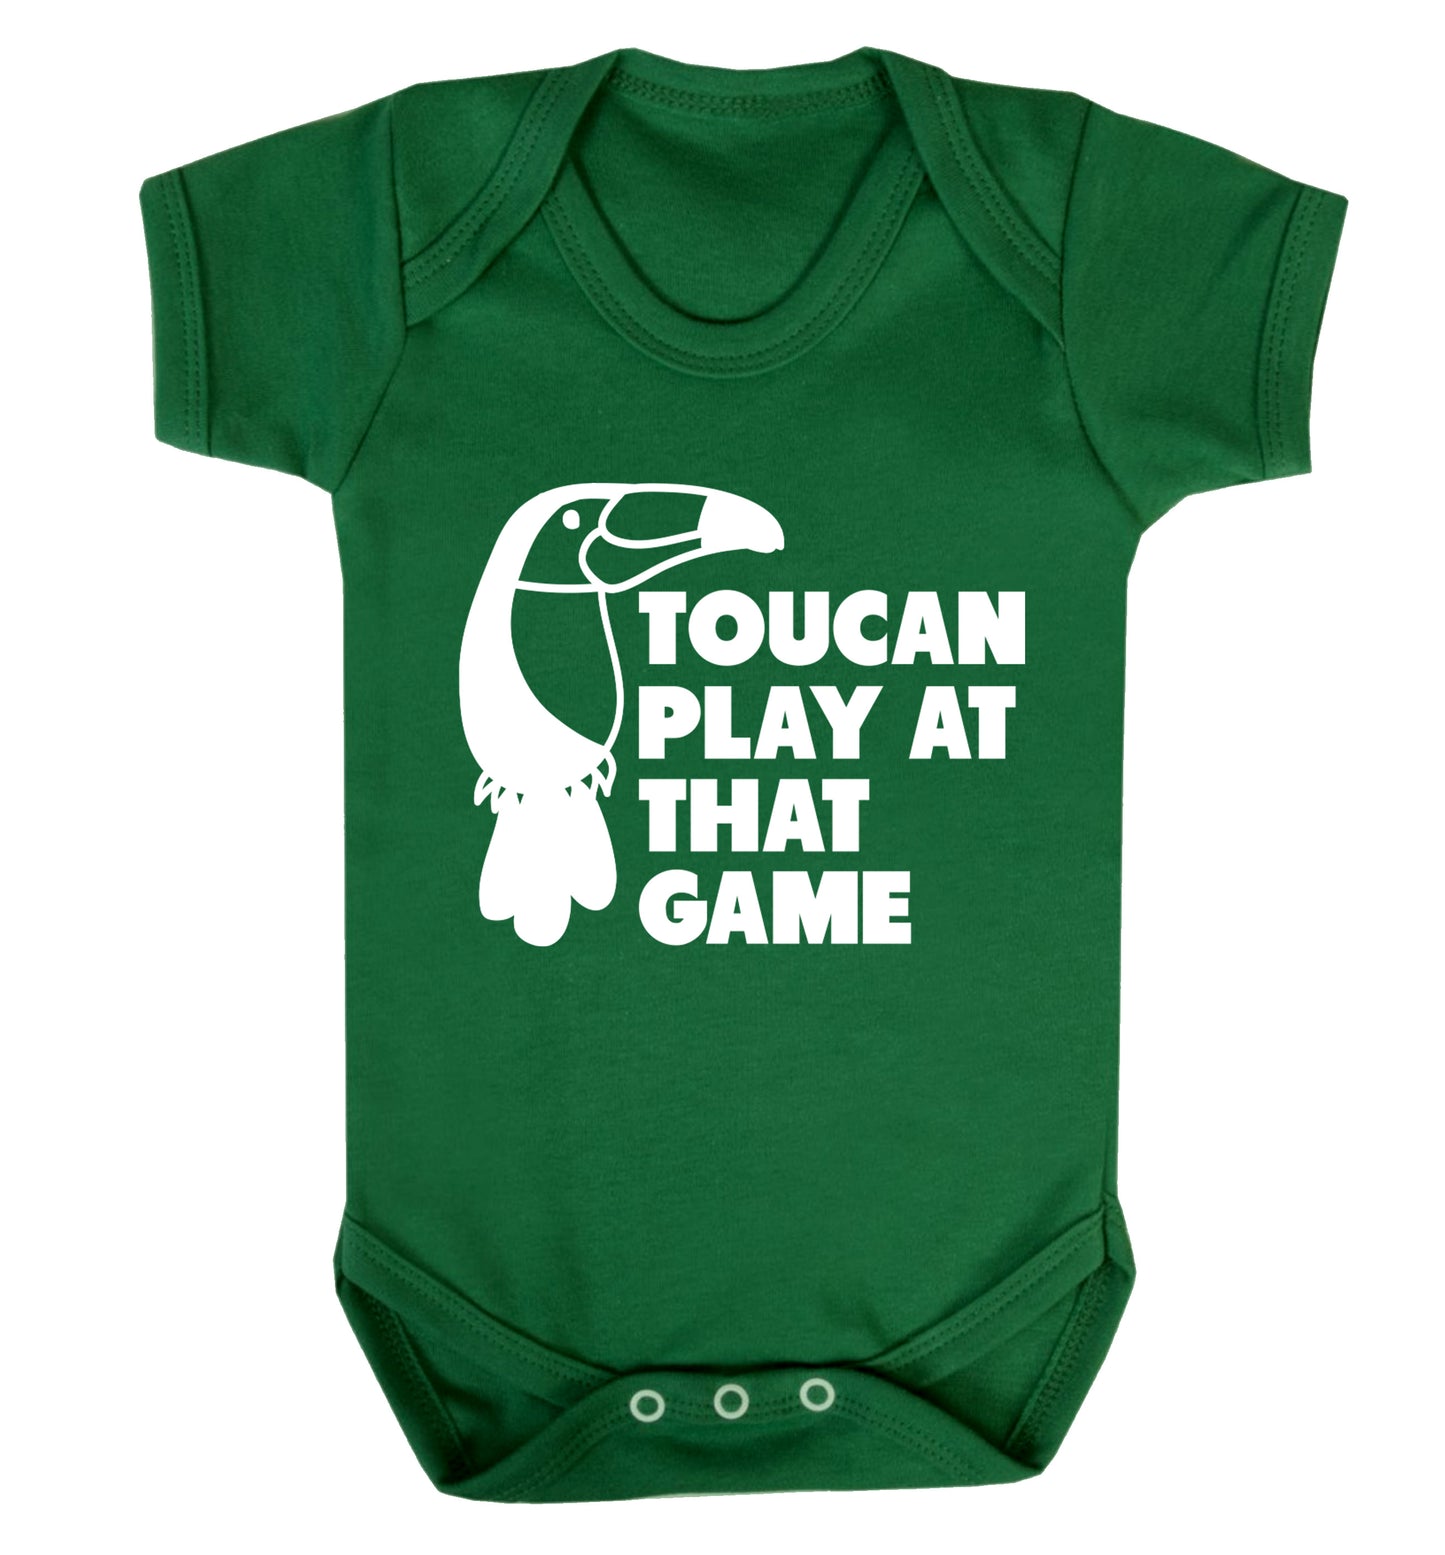 Toucan play at that game Baby Vest green 18-24 months